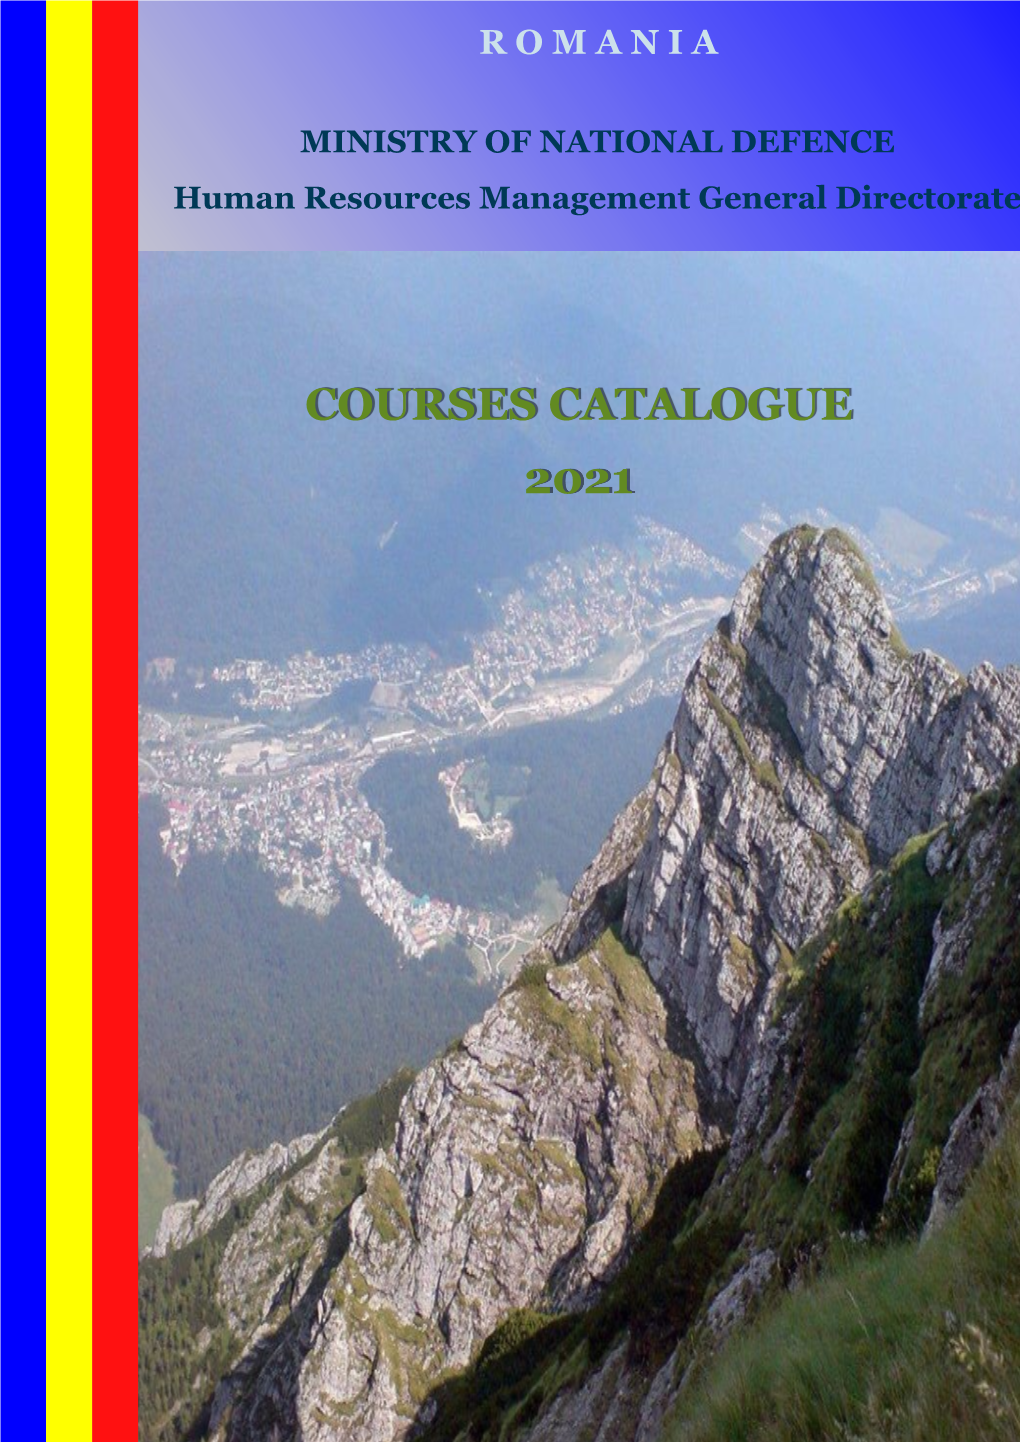 Courses Catalogue 2021 General Directorate for Human Resources Management